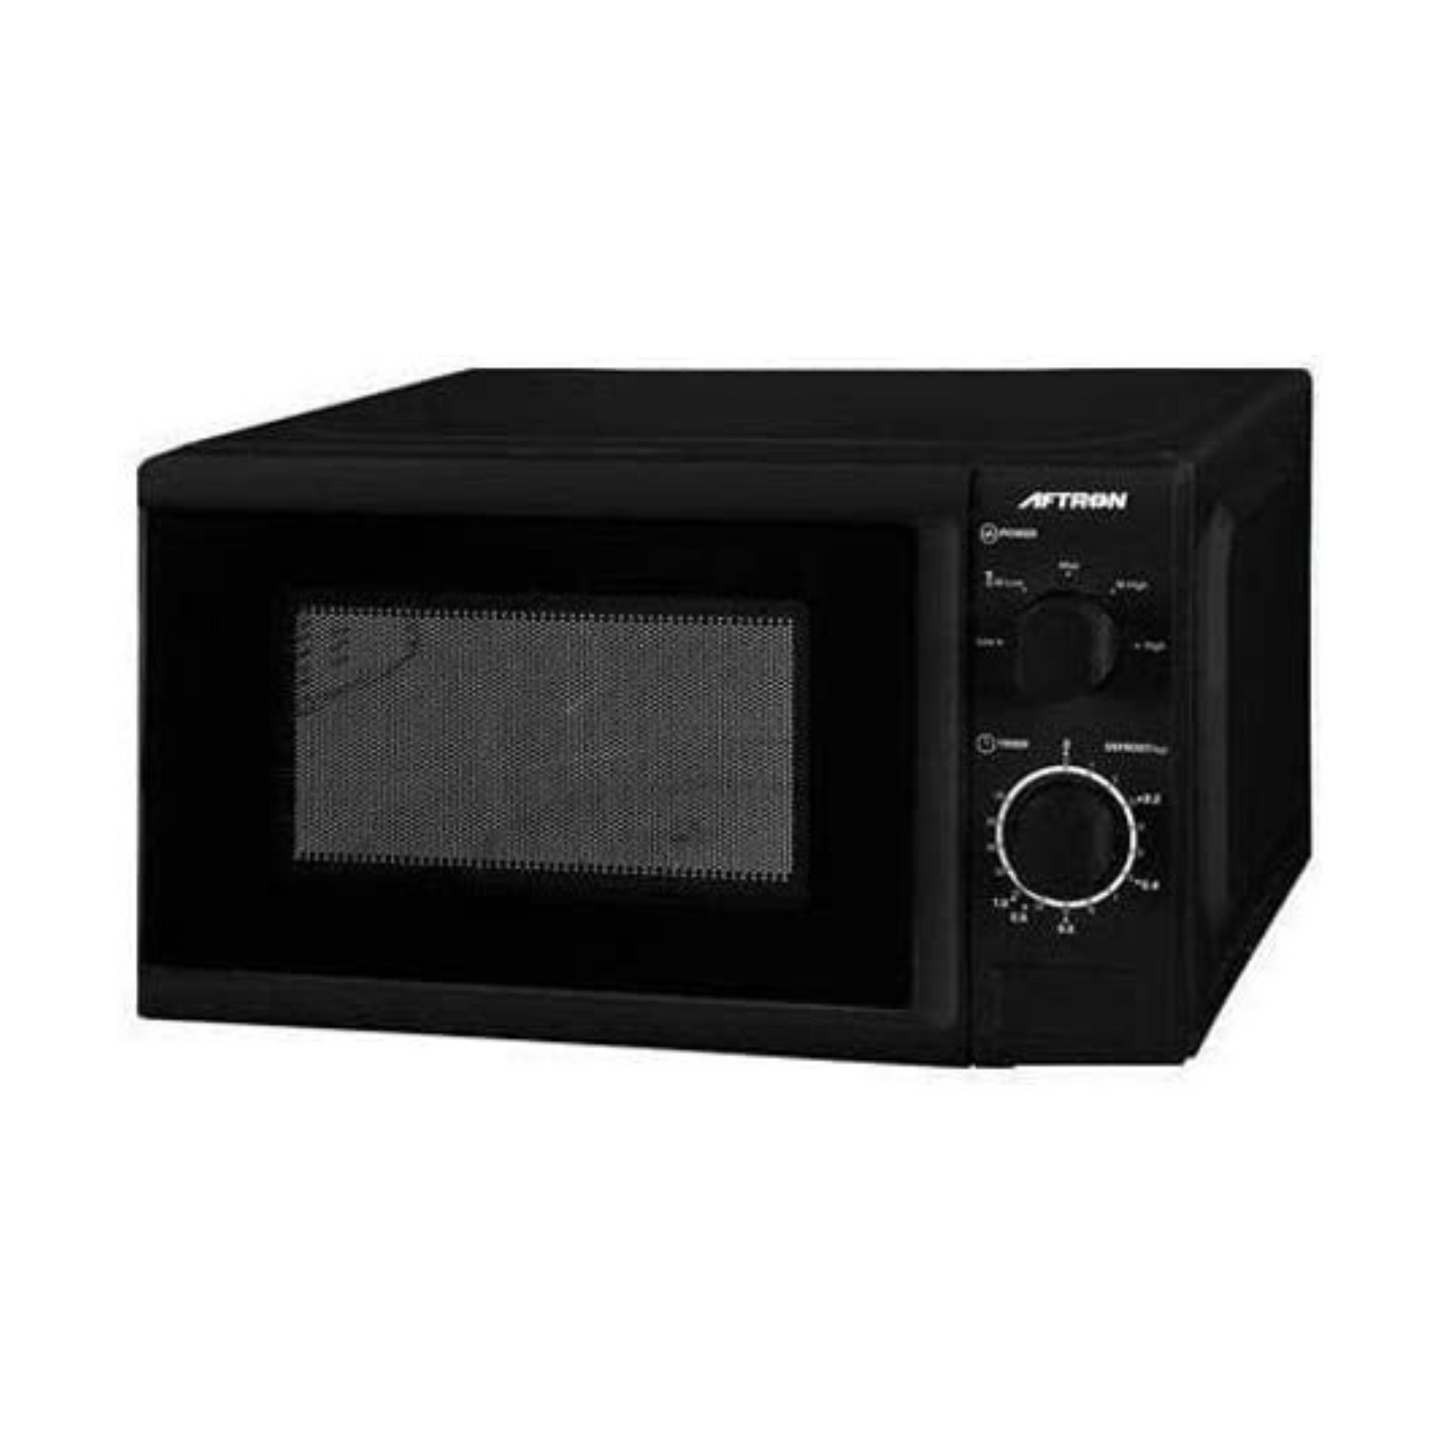 Aftron Microwave Oven 20L, AFMW205MNB